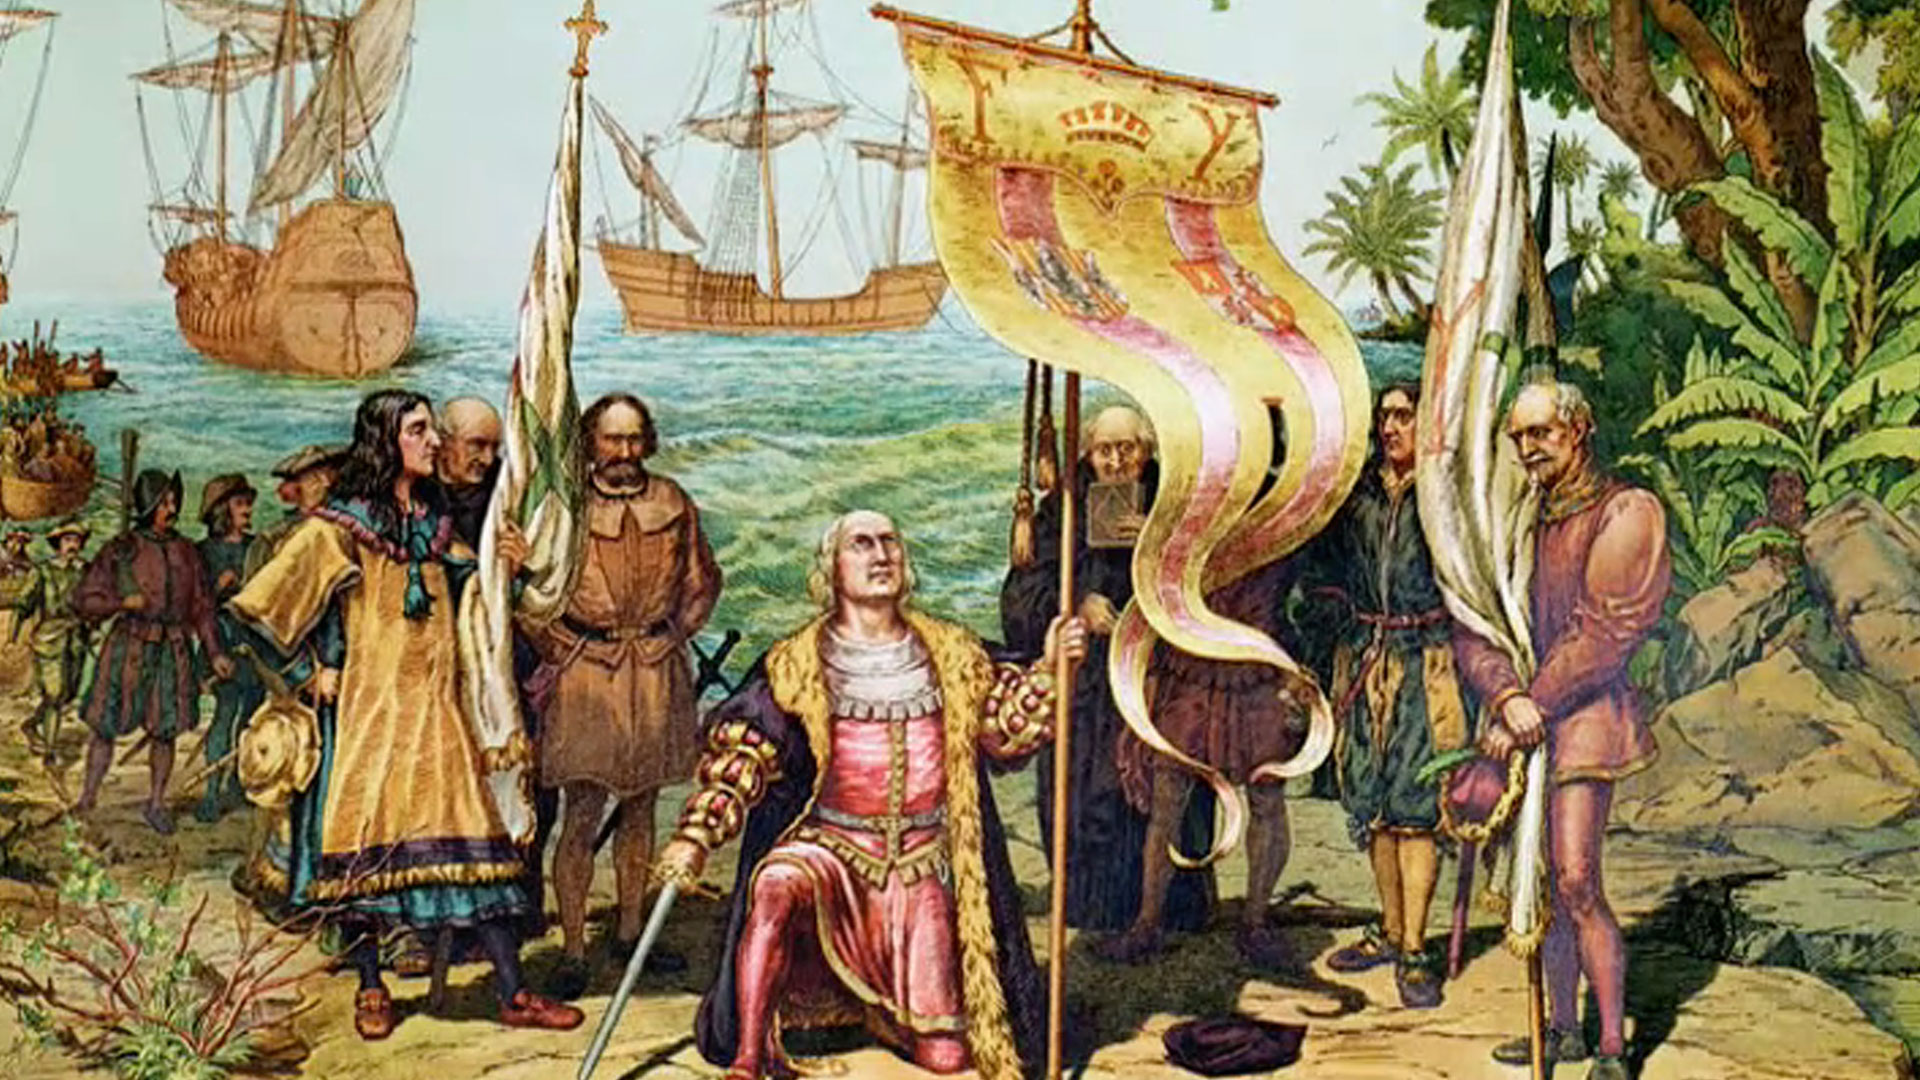 christopher columbus discovered america